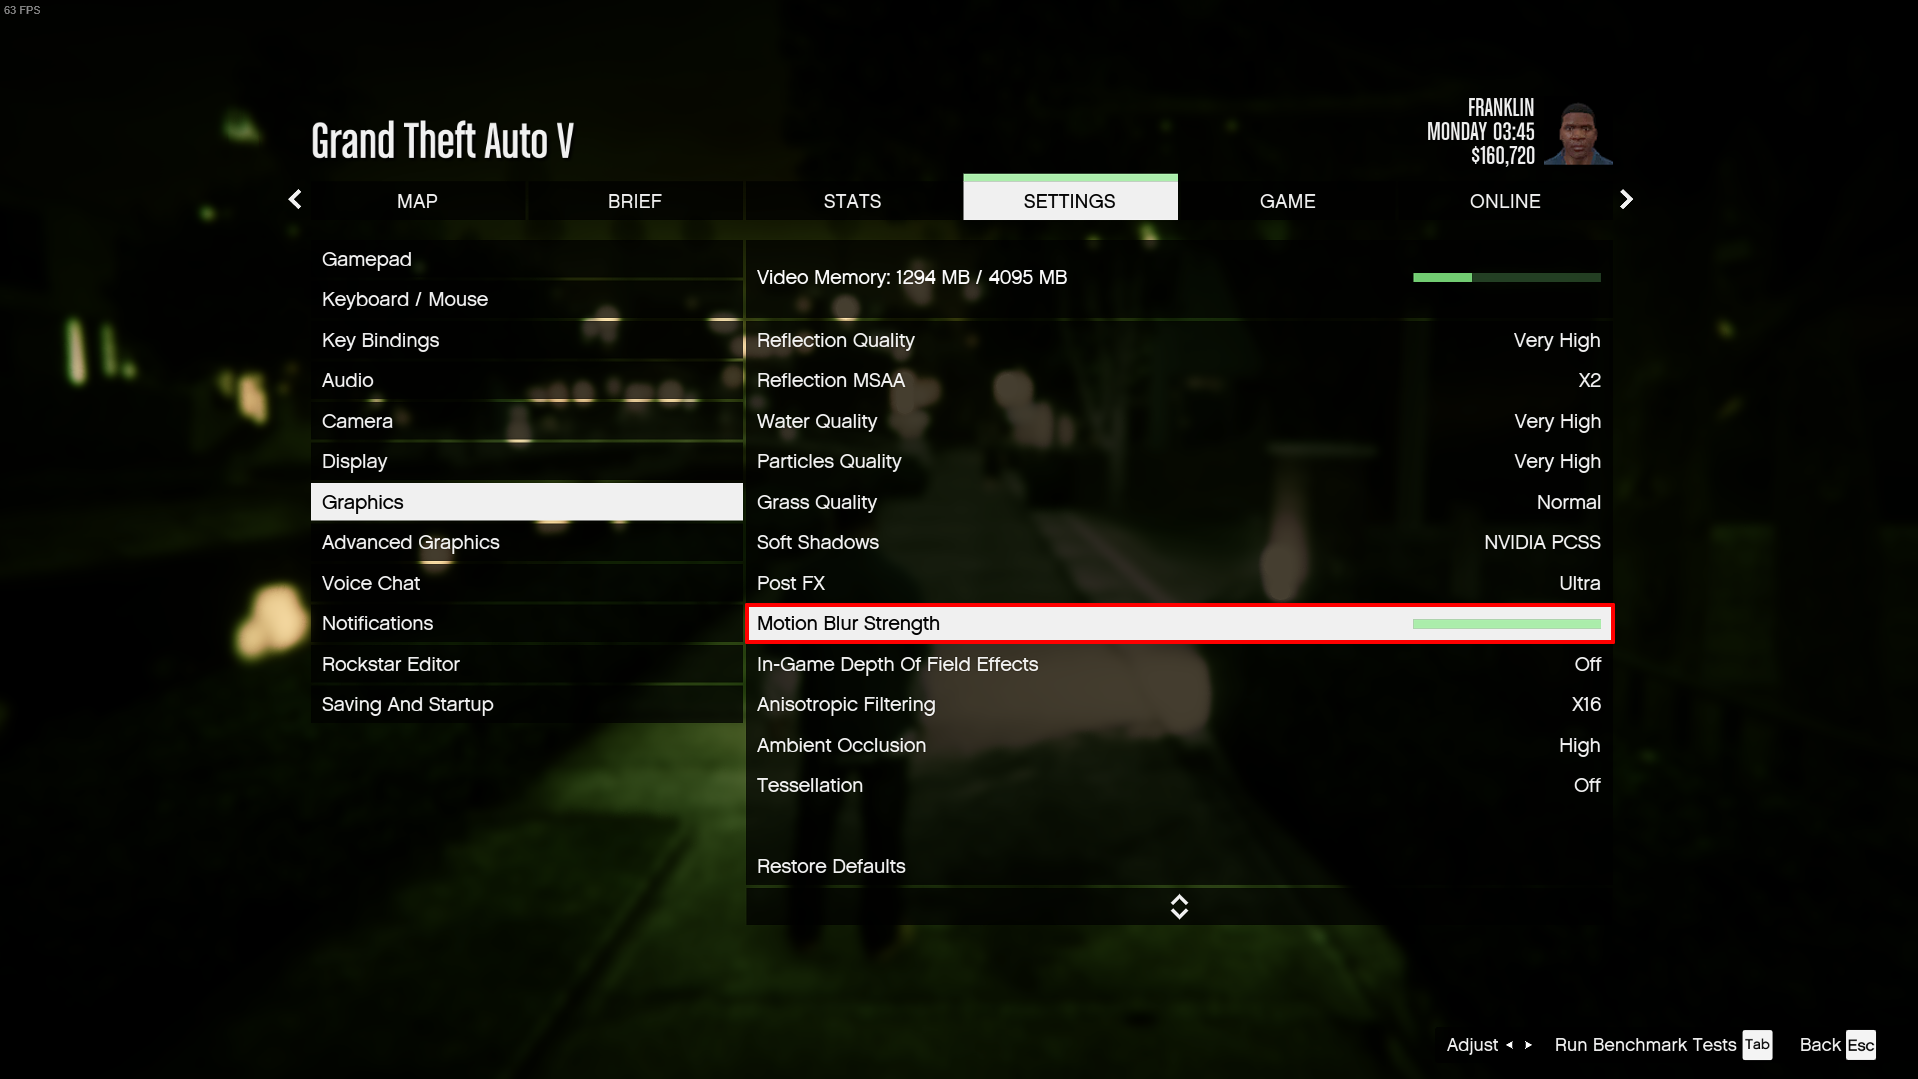 Grand Theft Auto V - How to Unlock Expanded and Enhanced Edition on PC - 3 - Set motion blur to the maximum setting - B32E2B8